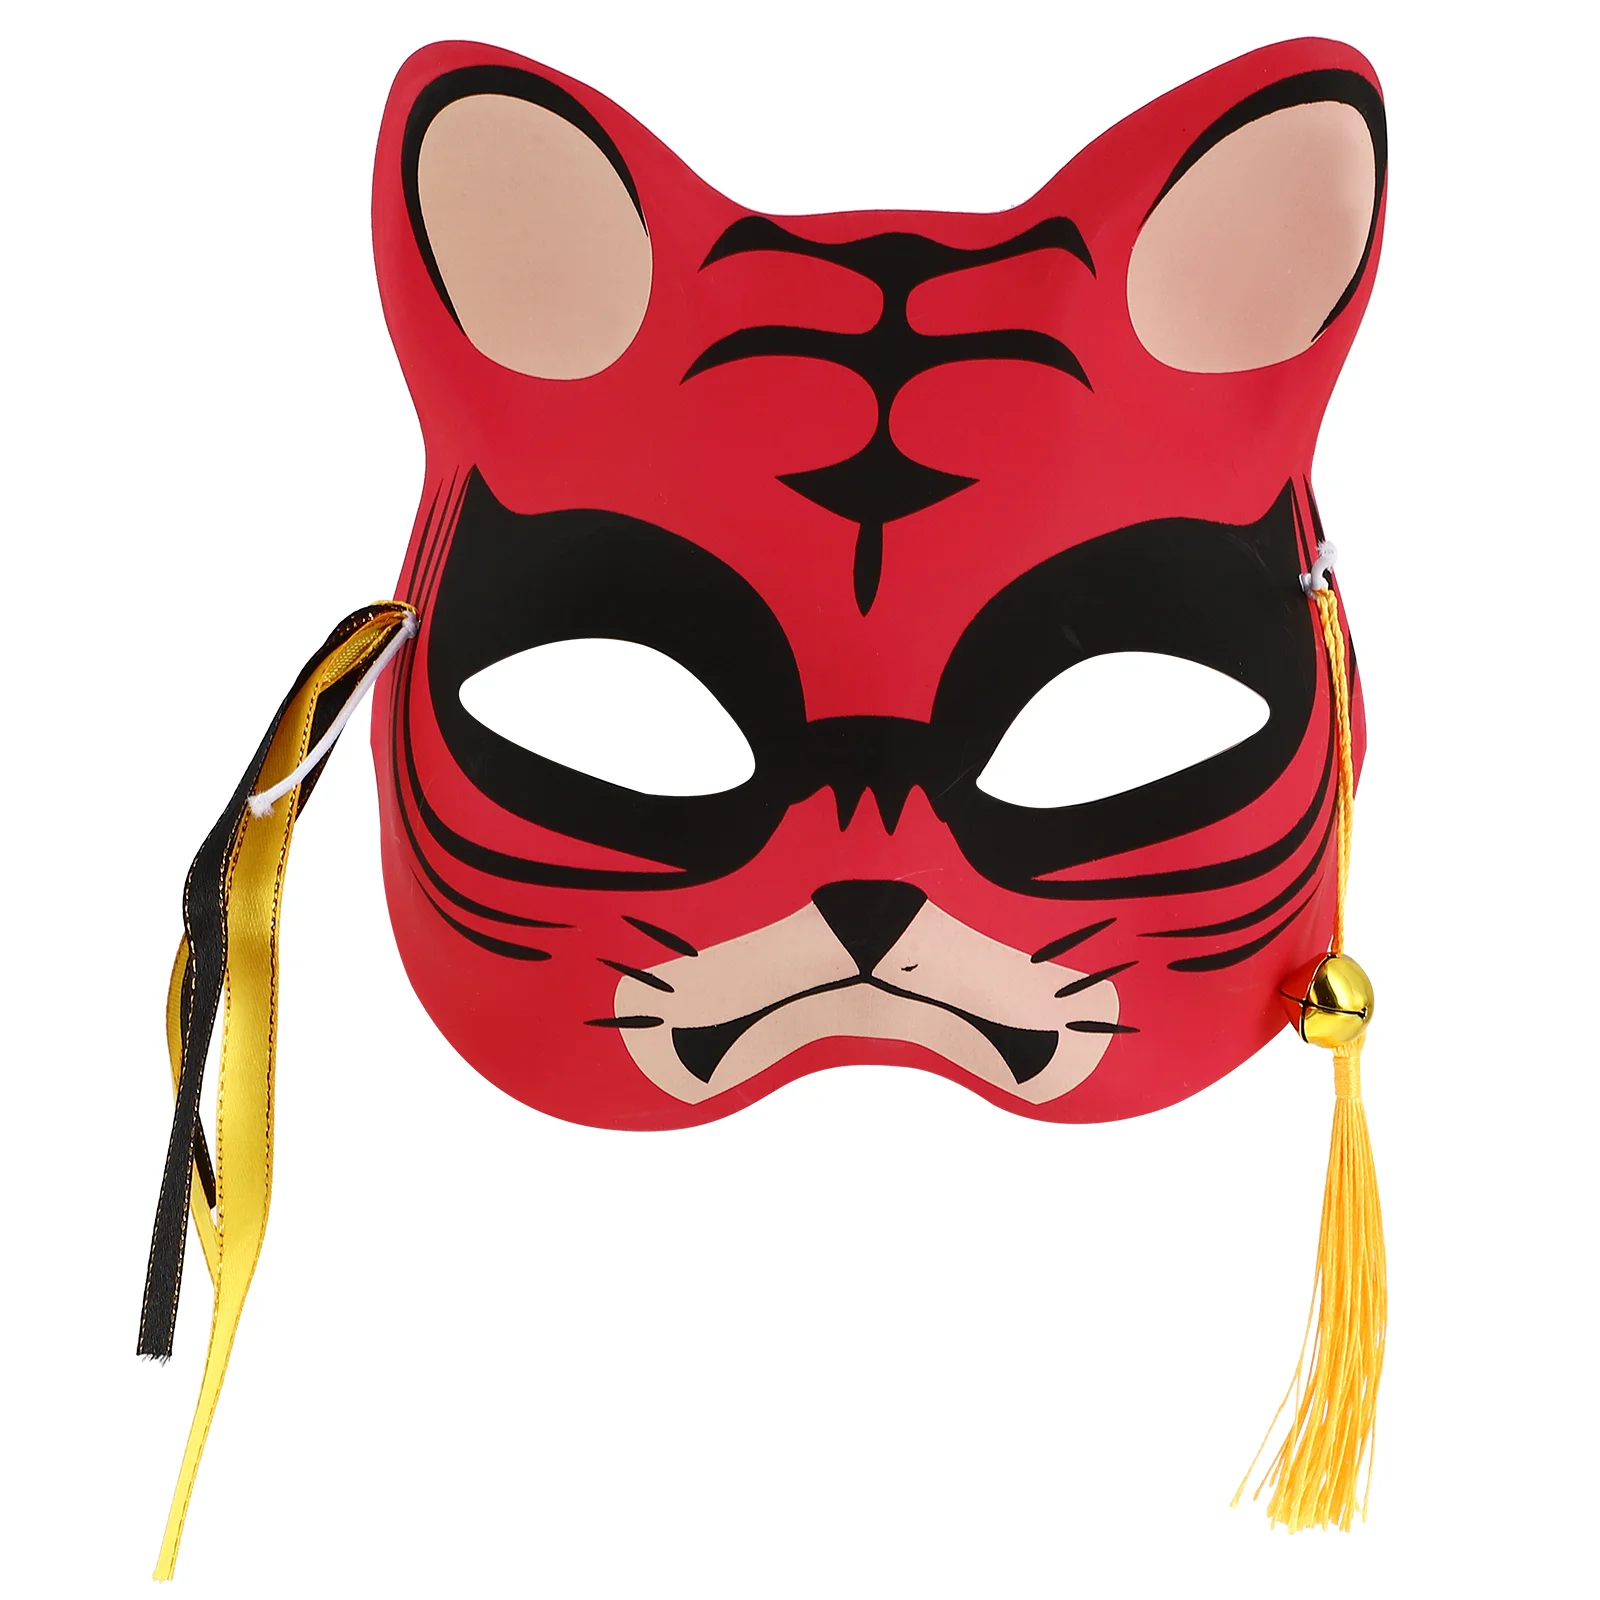 

Maskstiger Animal Half Face Party Masquerade Cosplay Kids Costumecat Scary Fox Adultglowing Painted Hand Performance Creepy